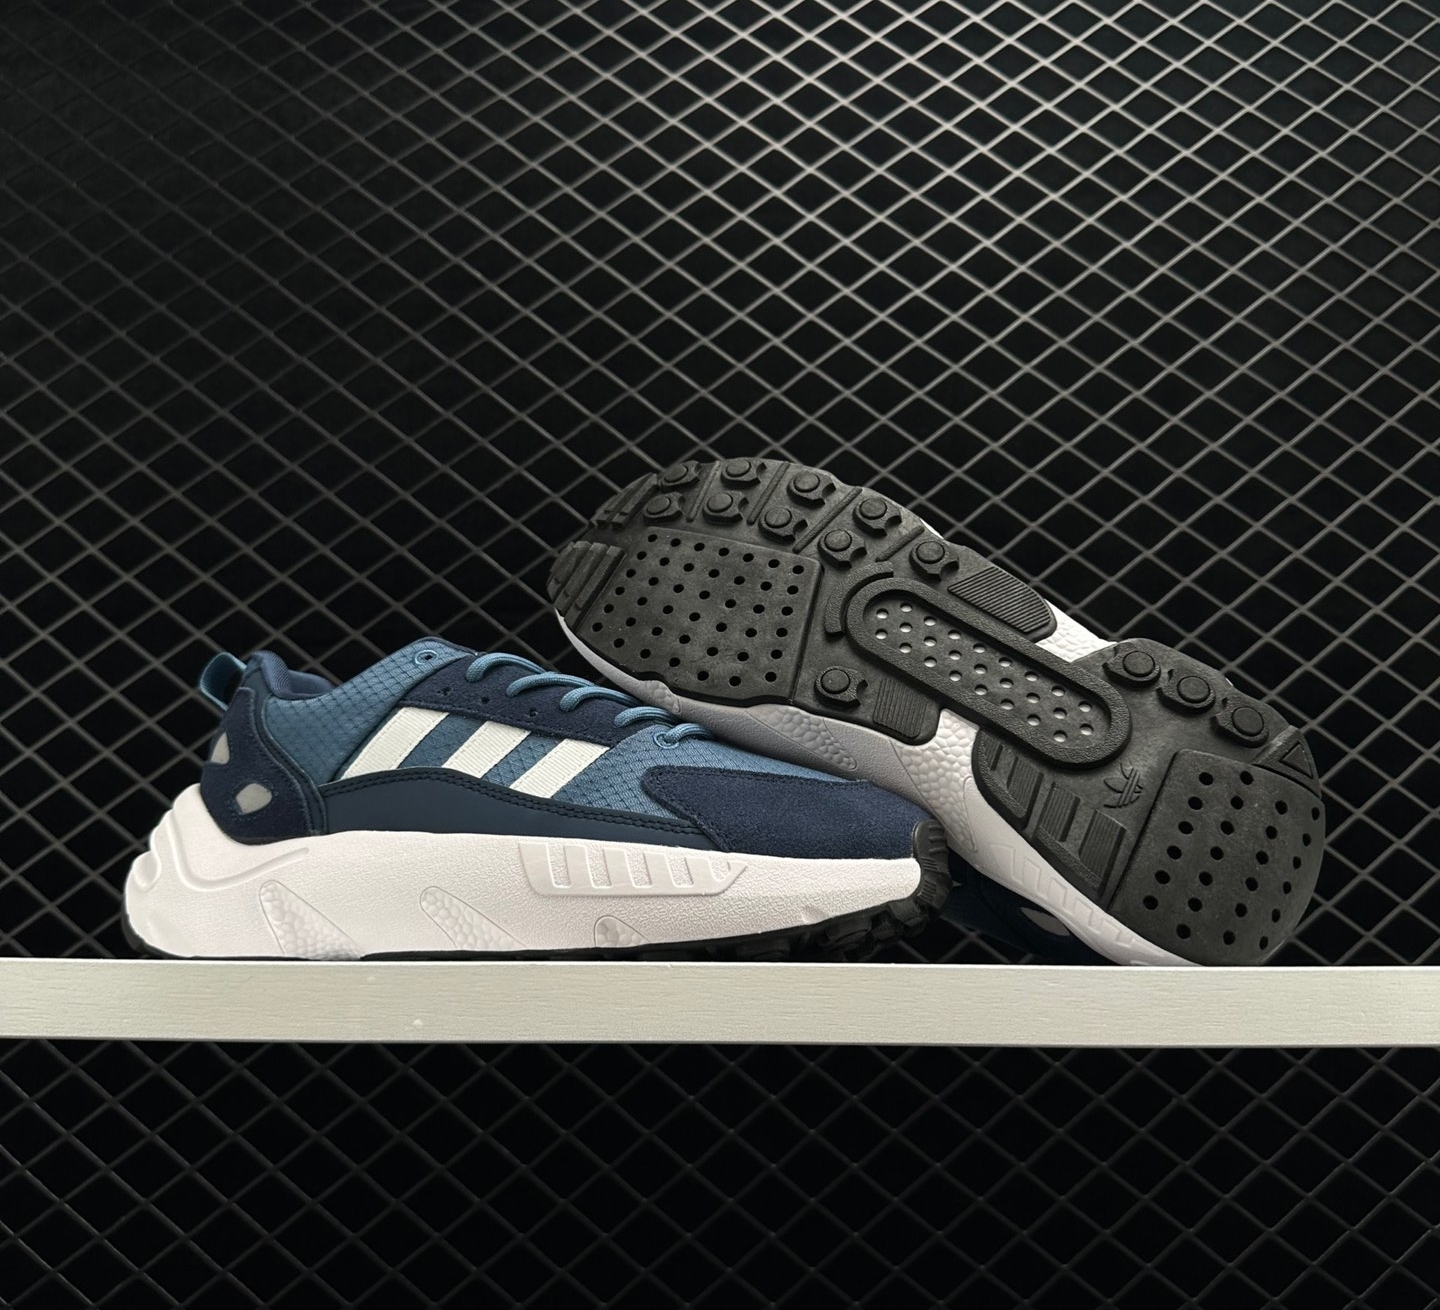 Adidas Originals ZX 22 Boost Navy Blue GY1623 - Stylish and Comfortable Footwear